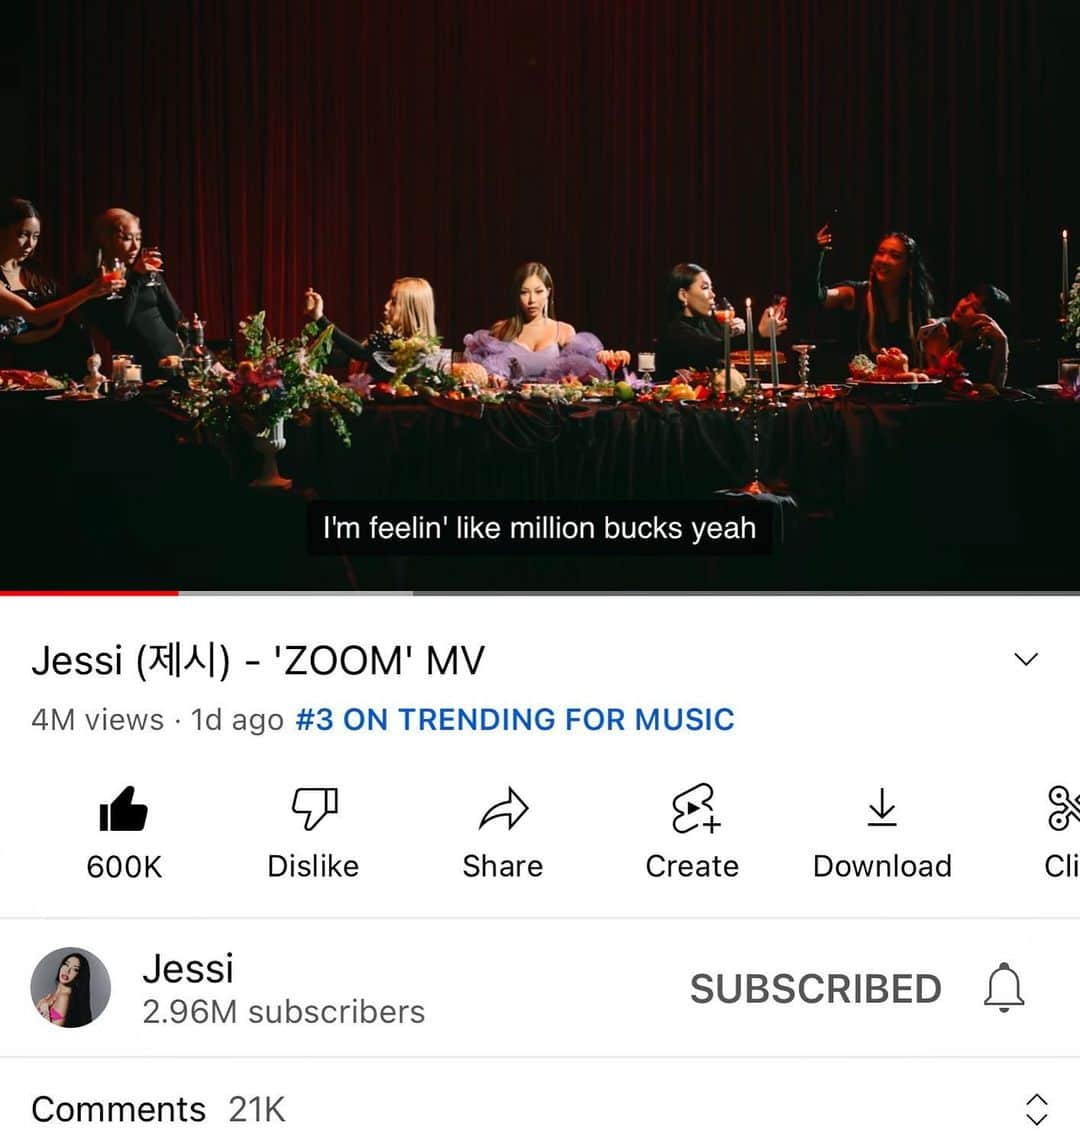 Jessiのインスタグラム：「THANK YOU ALL FOR 4MIL views in 1 day 😭😭 🙏🏻🙏🏻 I still cannot believe my music is trending in 37 countries… 😭😭 THANK YOU FOR ALL THE LOVE ❤️ Forever grateful 🙏🏻🙏🏻 after this week I will be taking a break for a little bit to get my health back up... But i’ll be right back. Love you all so much ❤️❤️ And a BIG SHOUTOUT TO @bobblehead_music_official for always believing in my vision and supporting me since day 1.. LOVE YOU ❤️❤️ 모두 항상 행복하세요 ❤️」